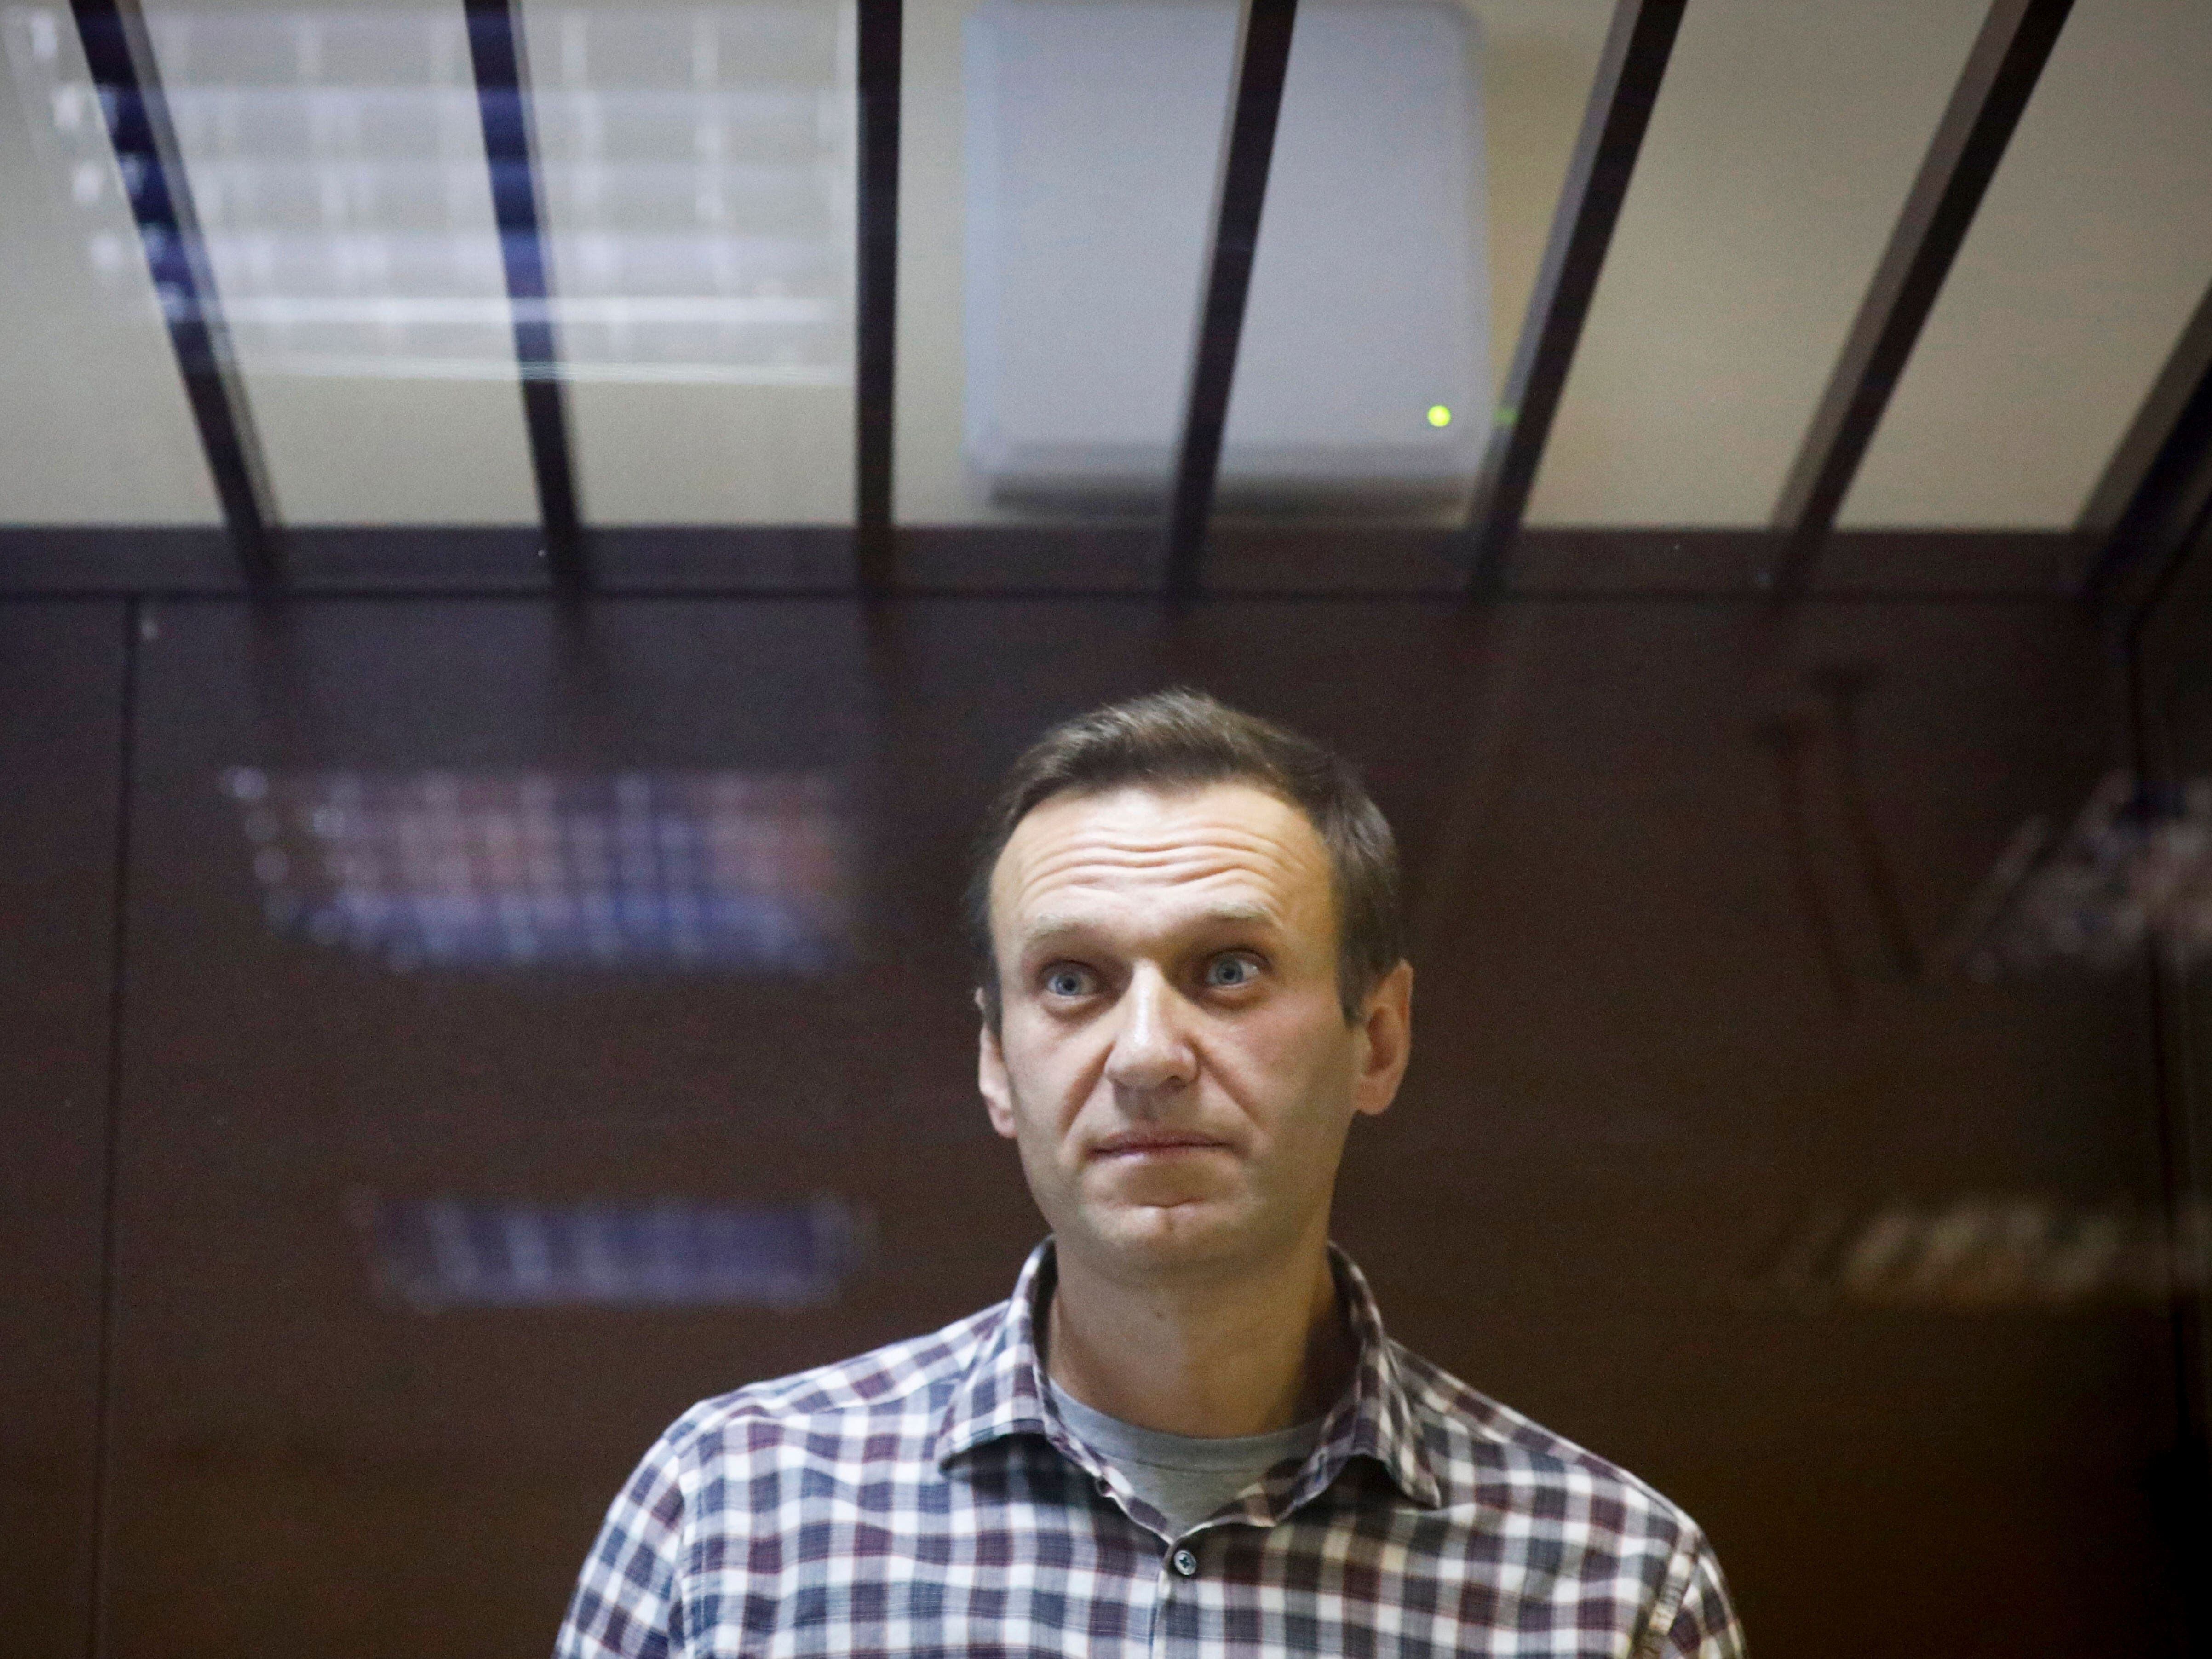 Jailed Russian opposition leader Navalny ‘ill after new suspected poisoning’